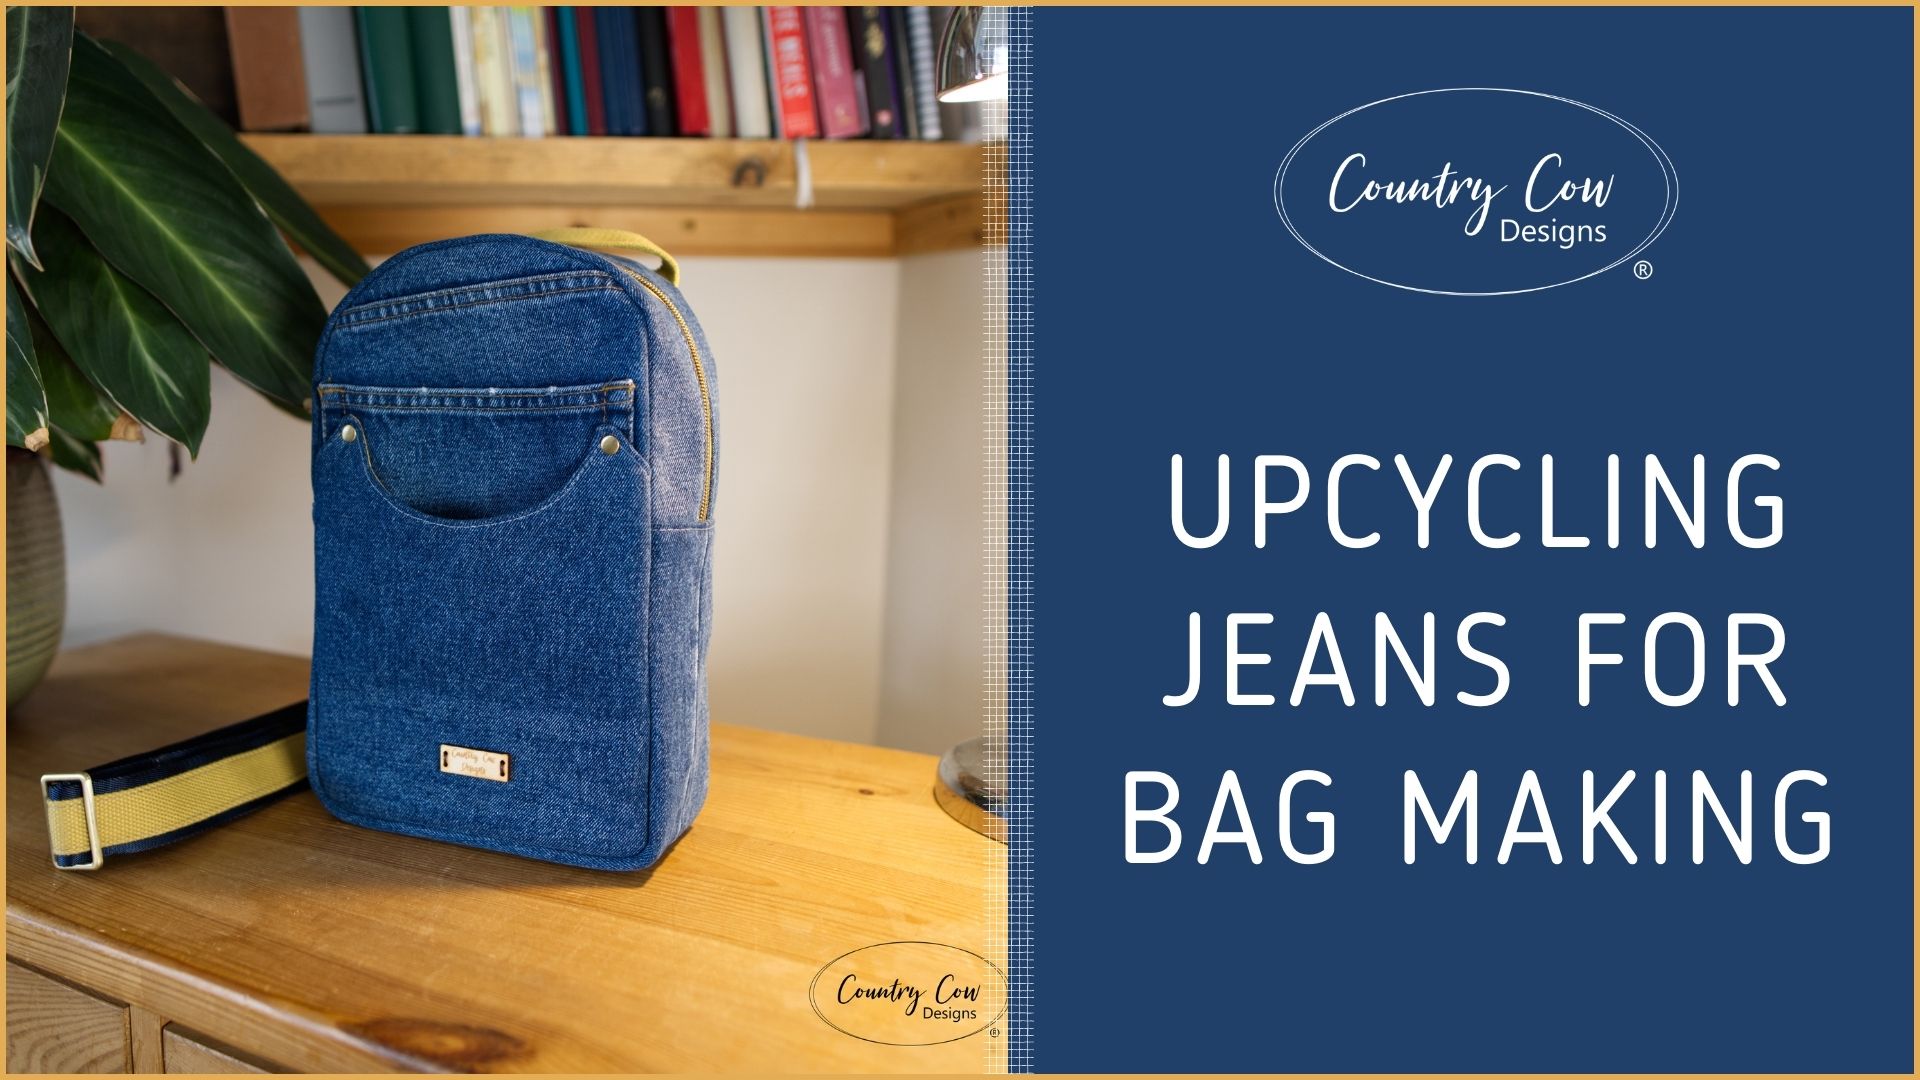 Upcycling jeans for bag making